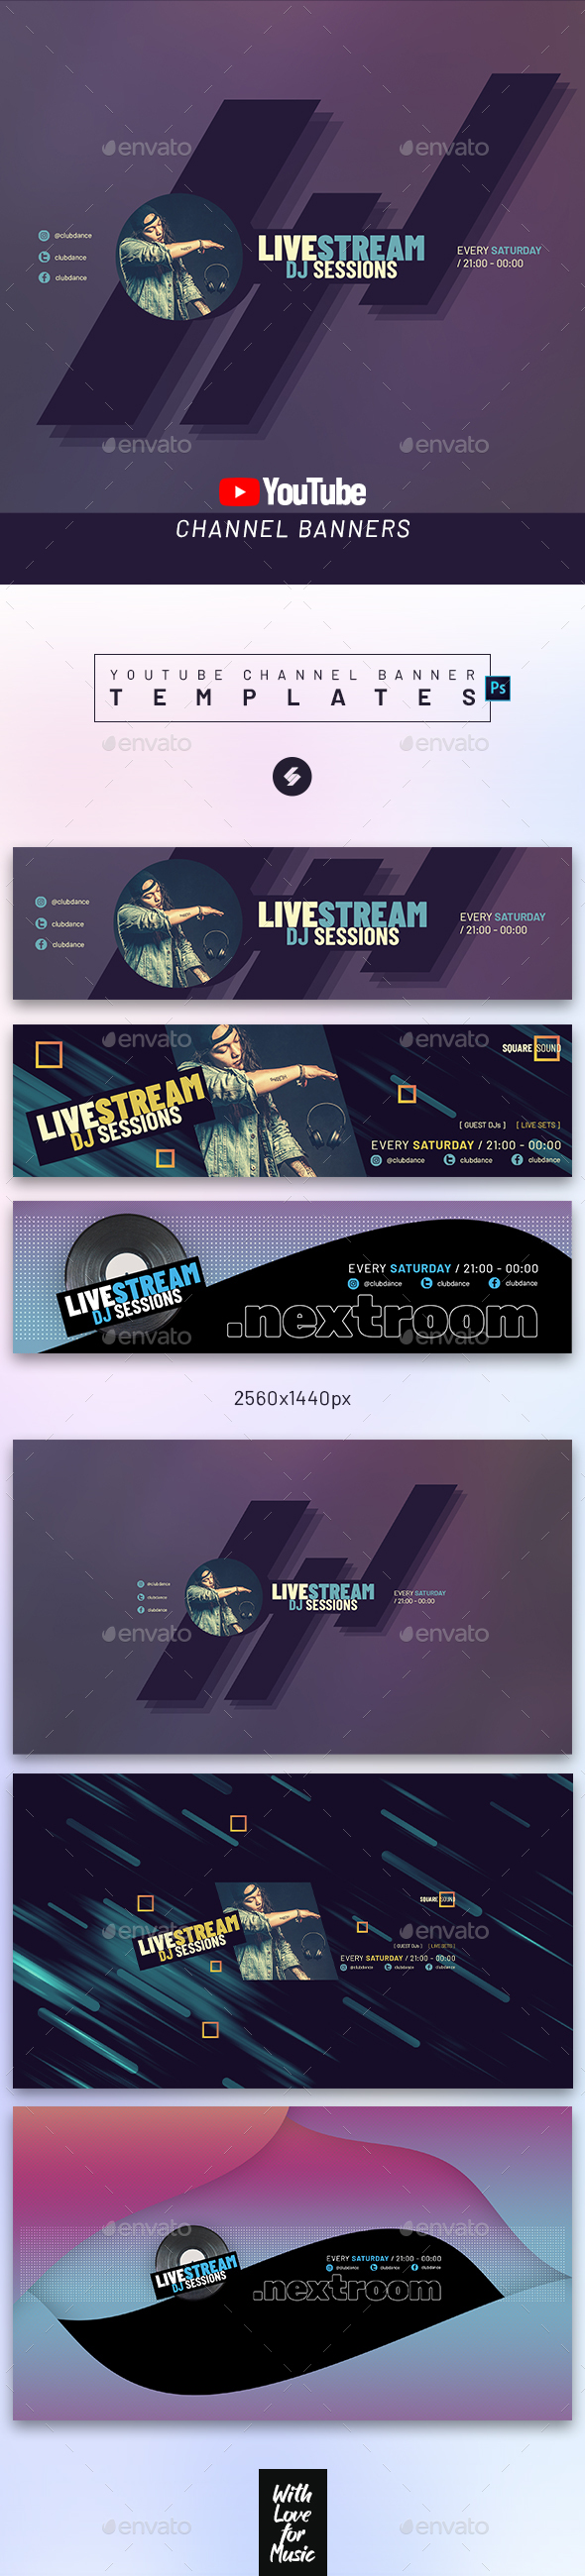 Electronic Music Channel – Youtube Banner Templates 02